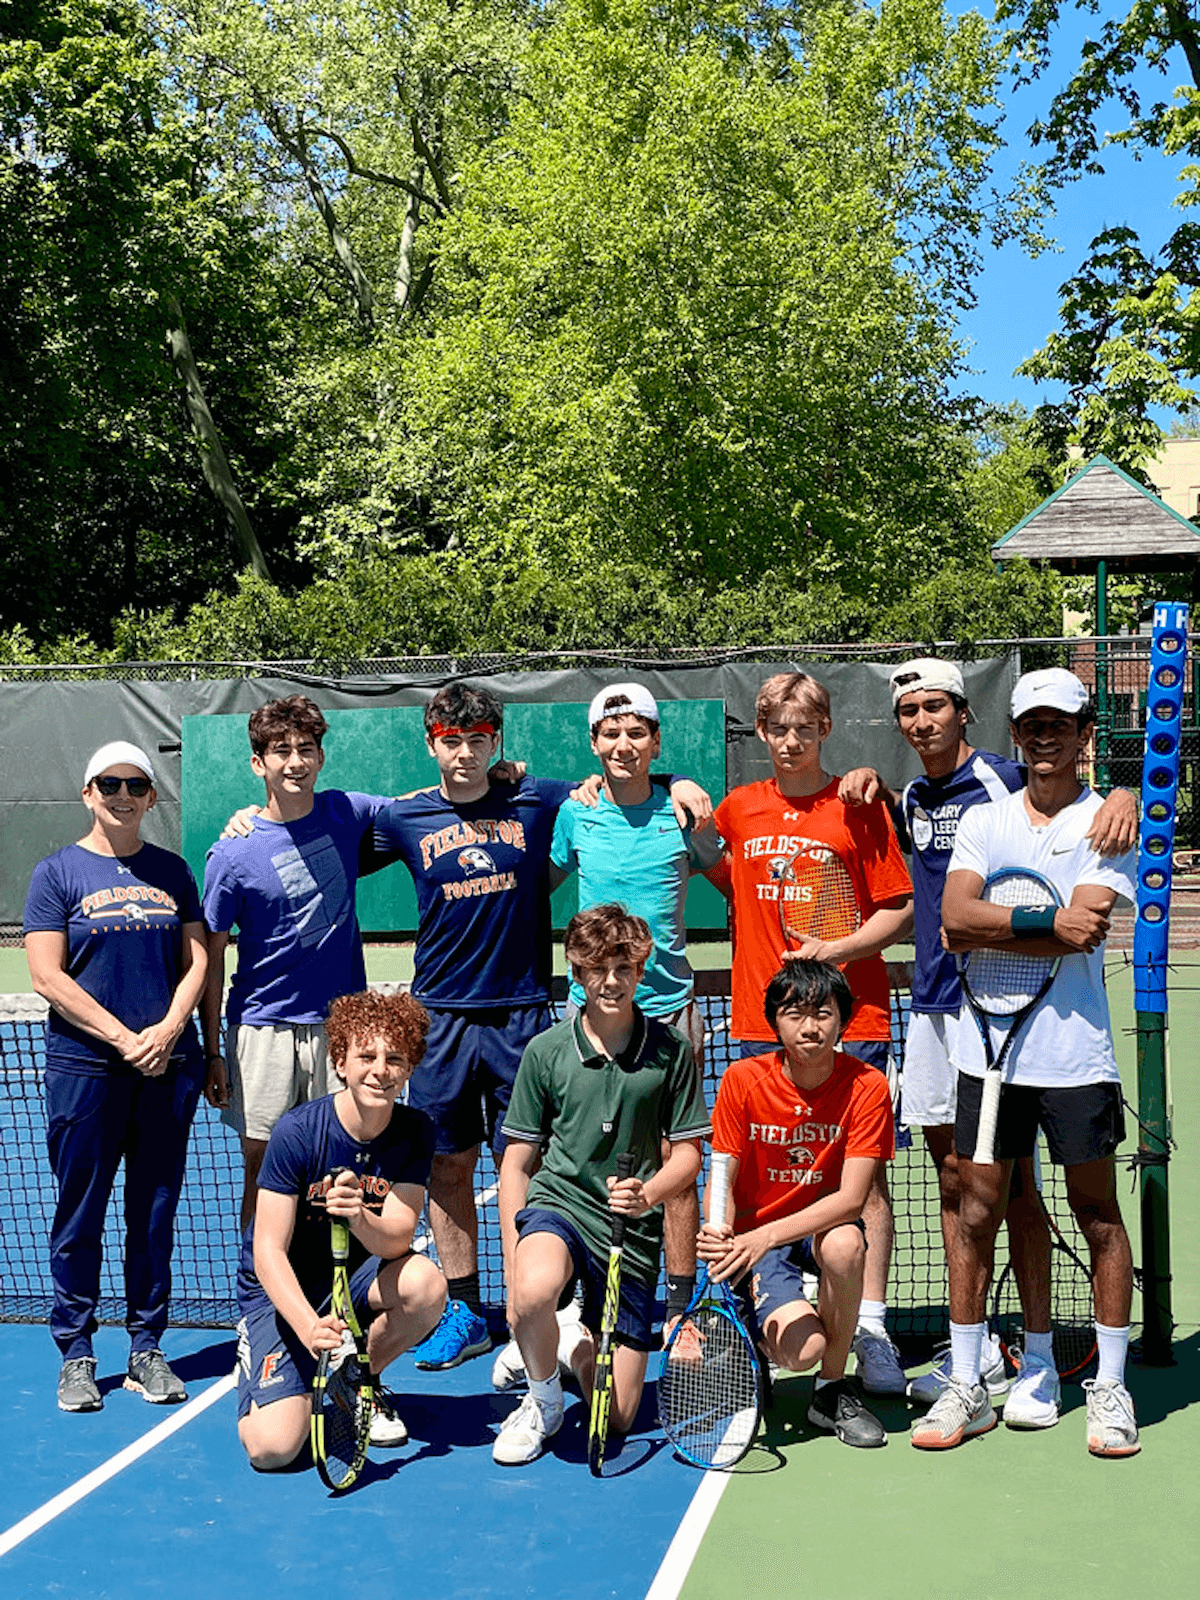 Ethical Culture Fieldston tennis athletes pose at Spring Fling.